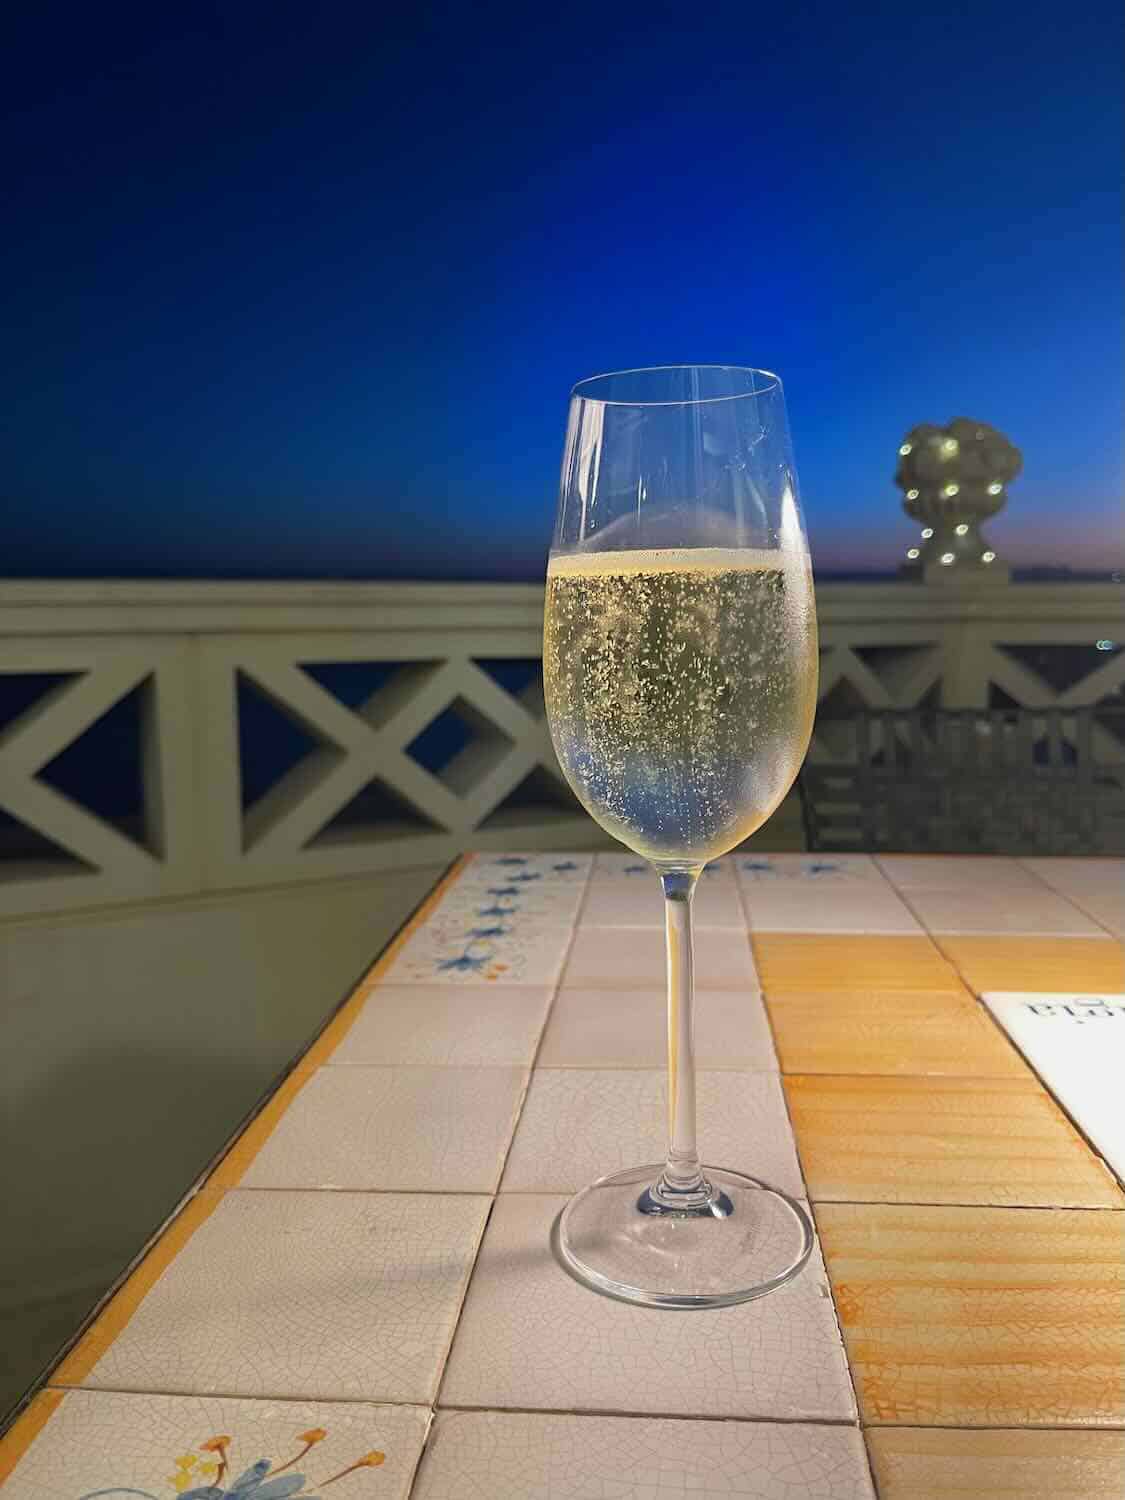 A photo of a glass of sparkling wine on a tiled table at dusk. The background features a scenic view of a blue sky transitioning to night, with decorative elements and soft lighting creating an elegant ambiance.